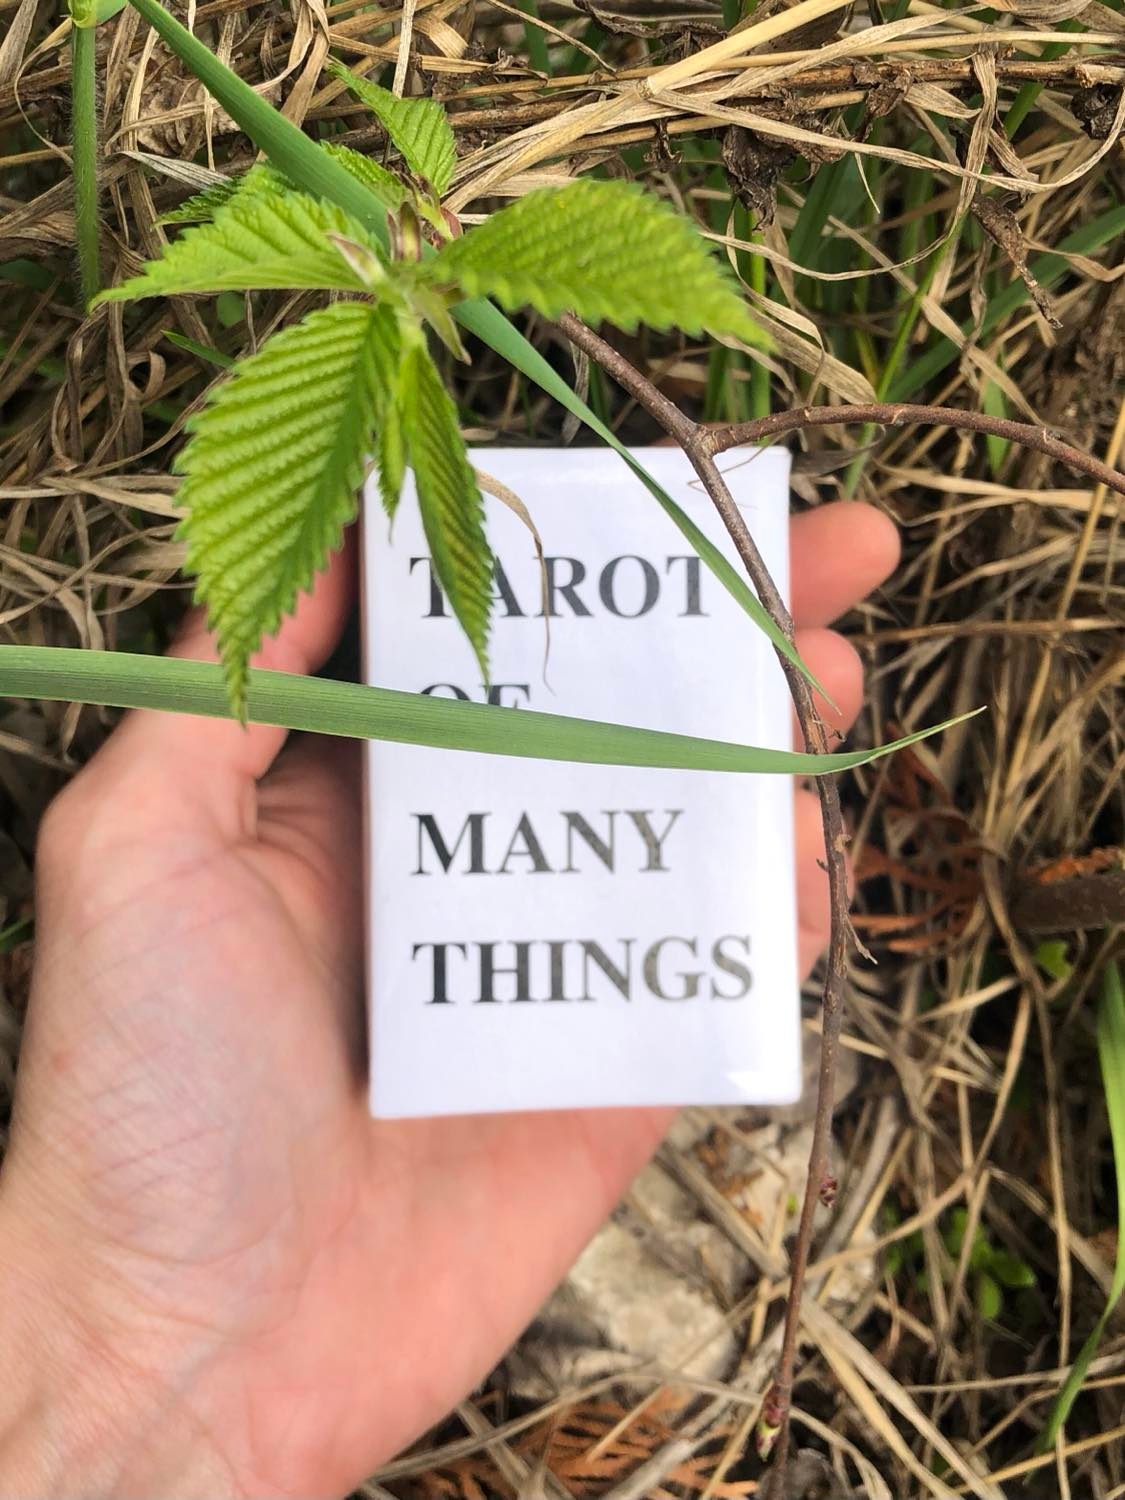 The Tarot of Many Things, found laying in the grasses of a forest.